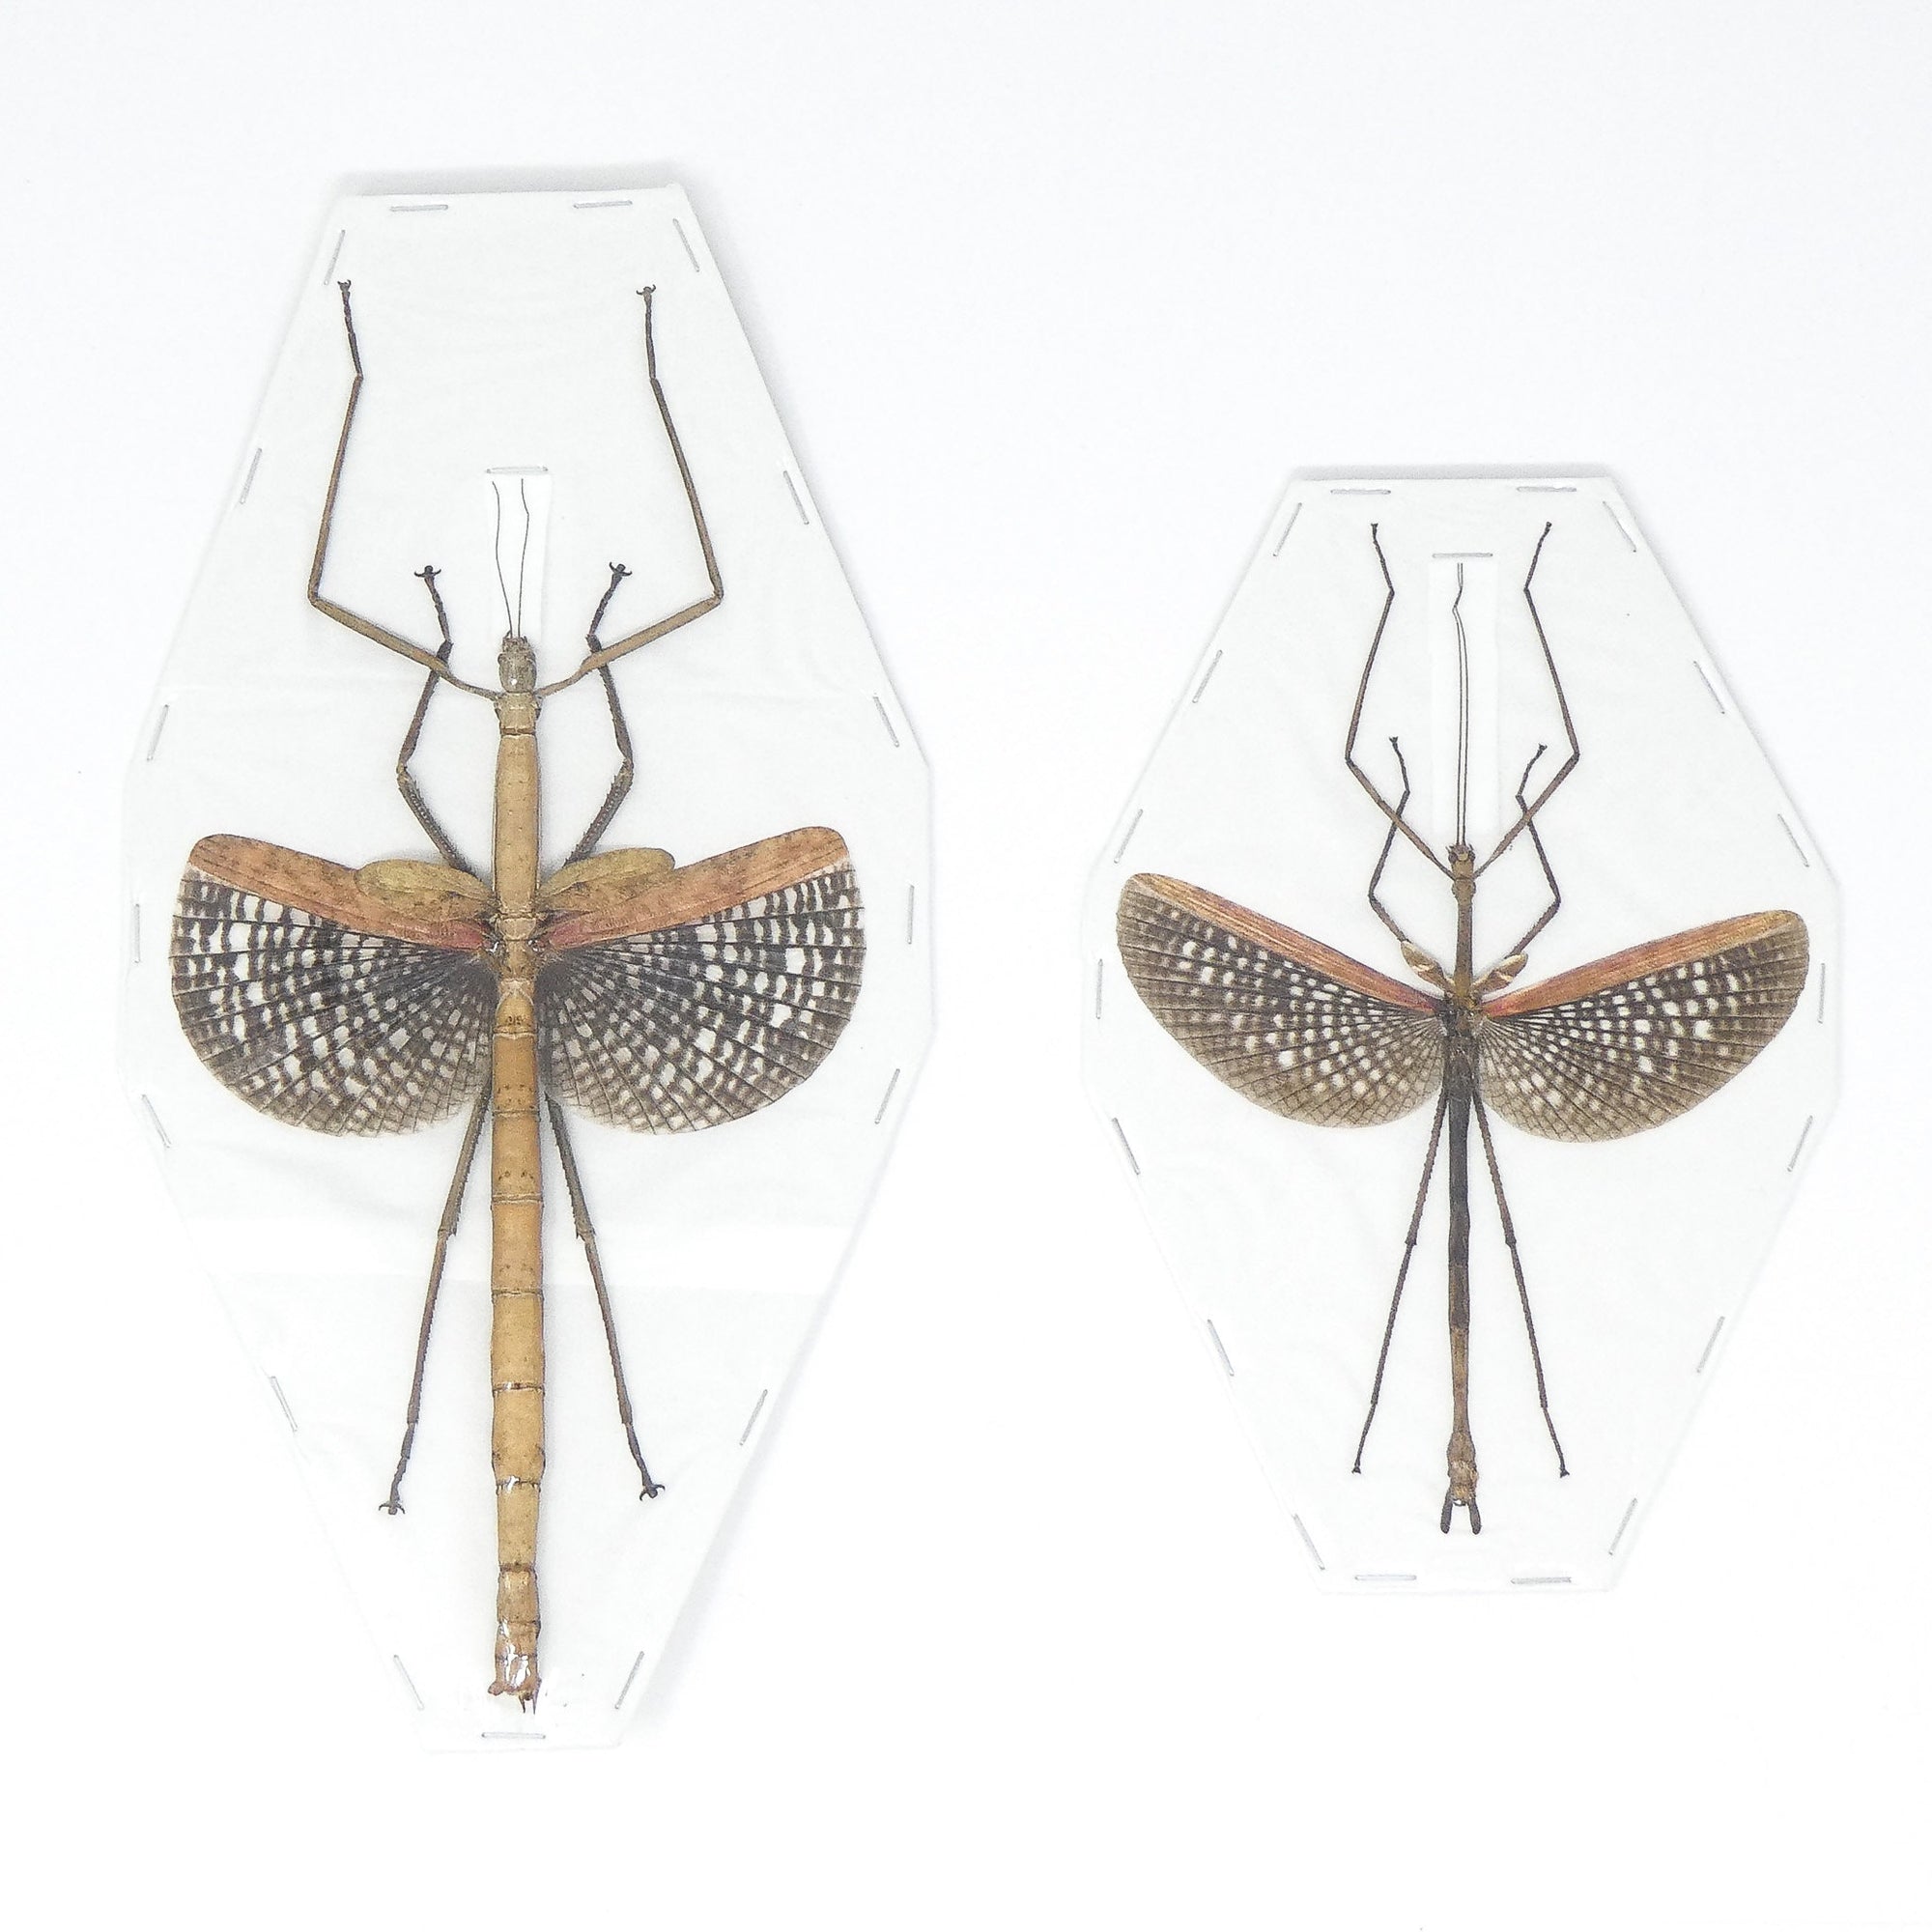 TWO (2) Buru Giant Stick-Insects (Anchiale buruense) 170mm+ A1 Dry-Preserved Real Entomology Phasmid Specimens